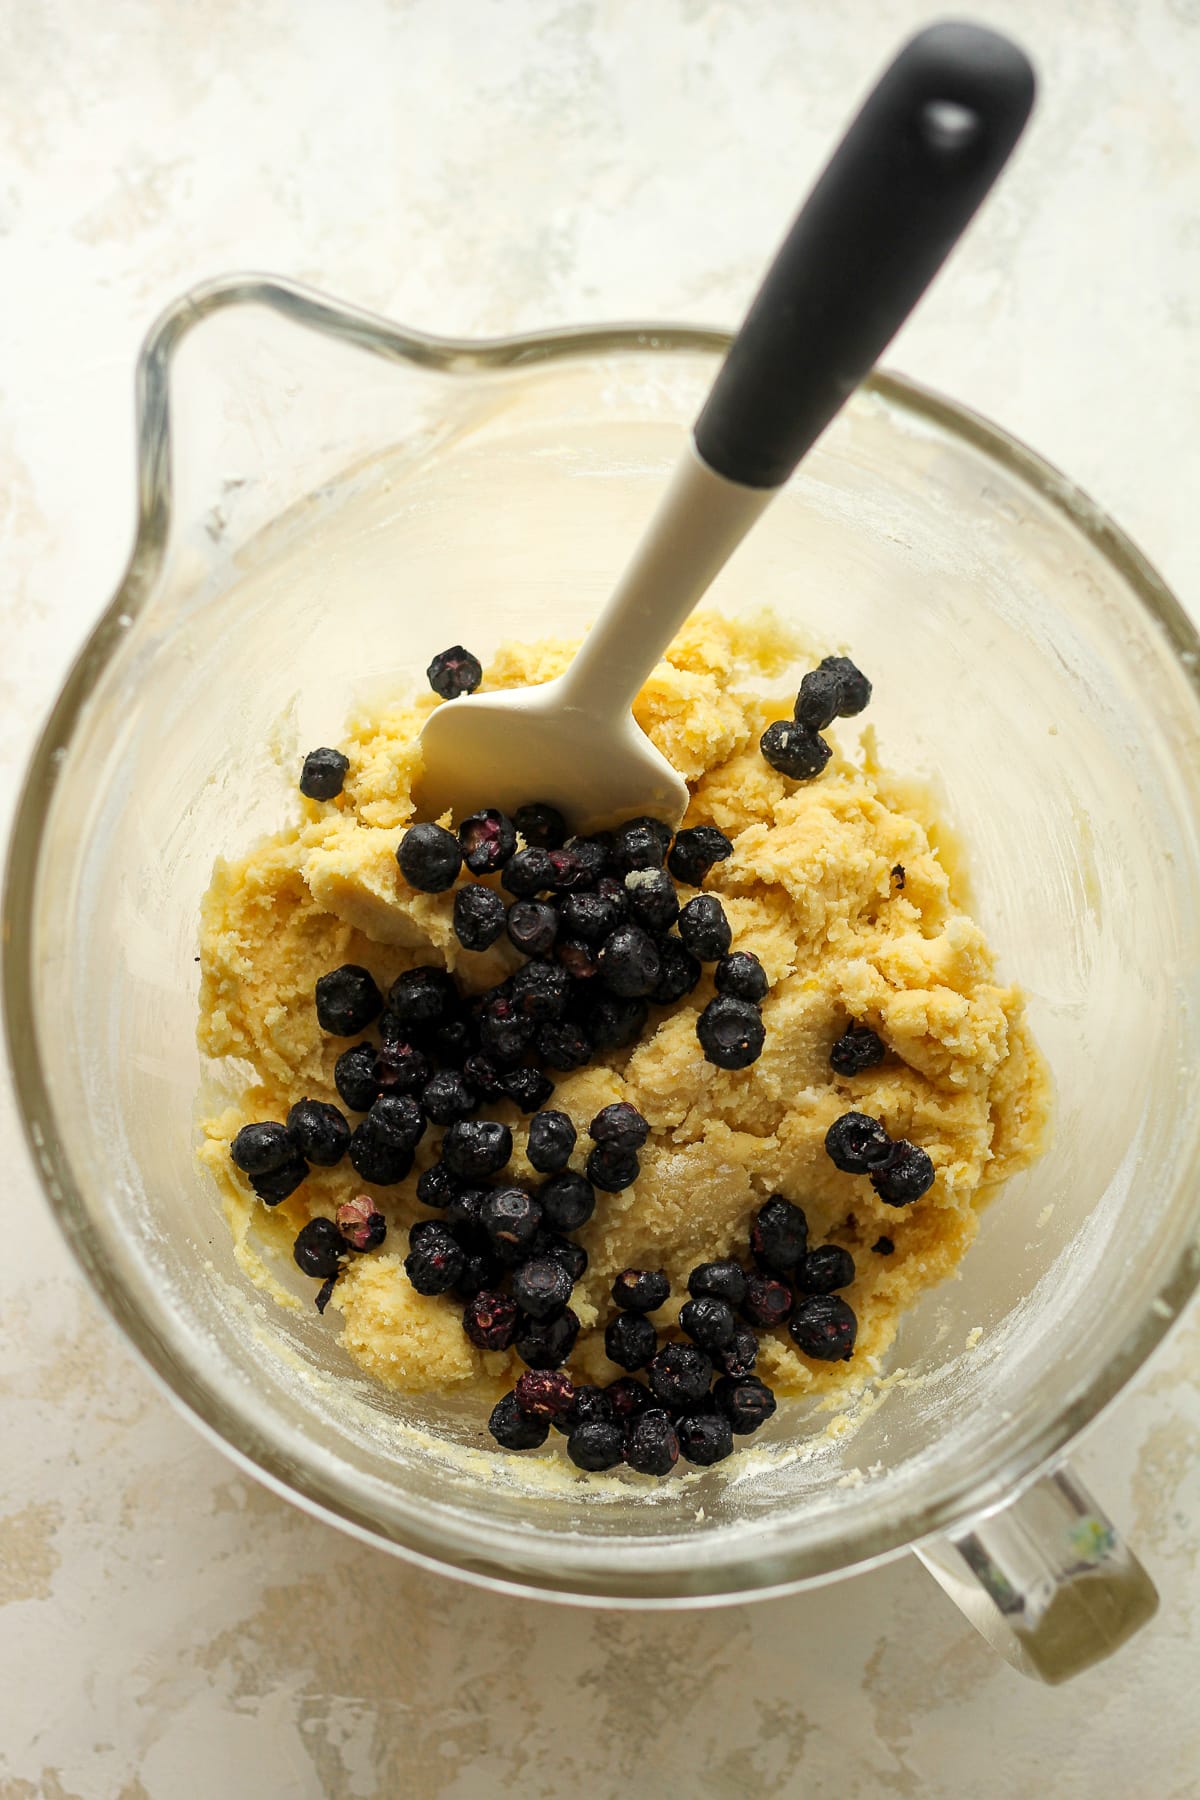 A mixing bowl of the cookie batter with the freeze-dried blueberries on top.